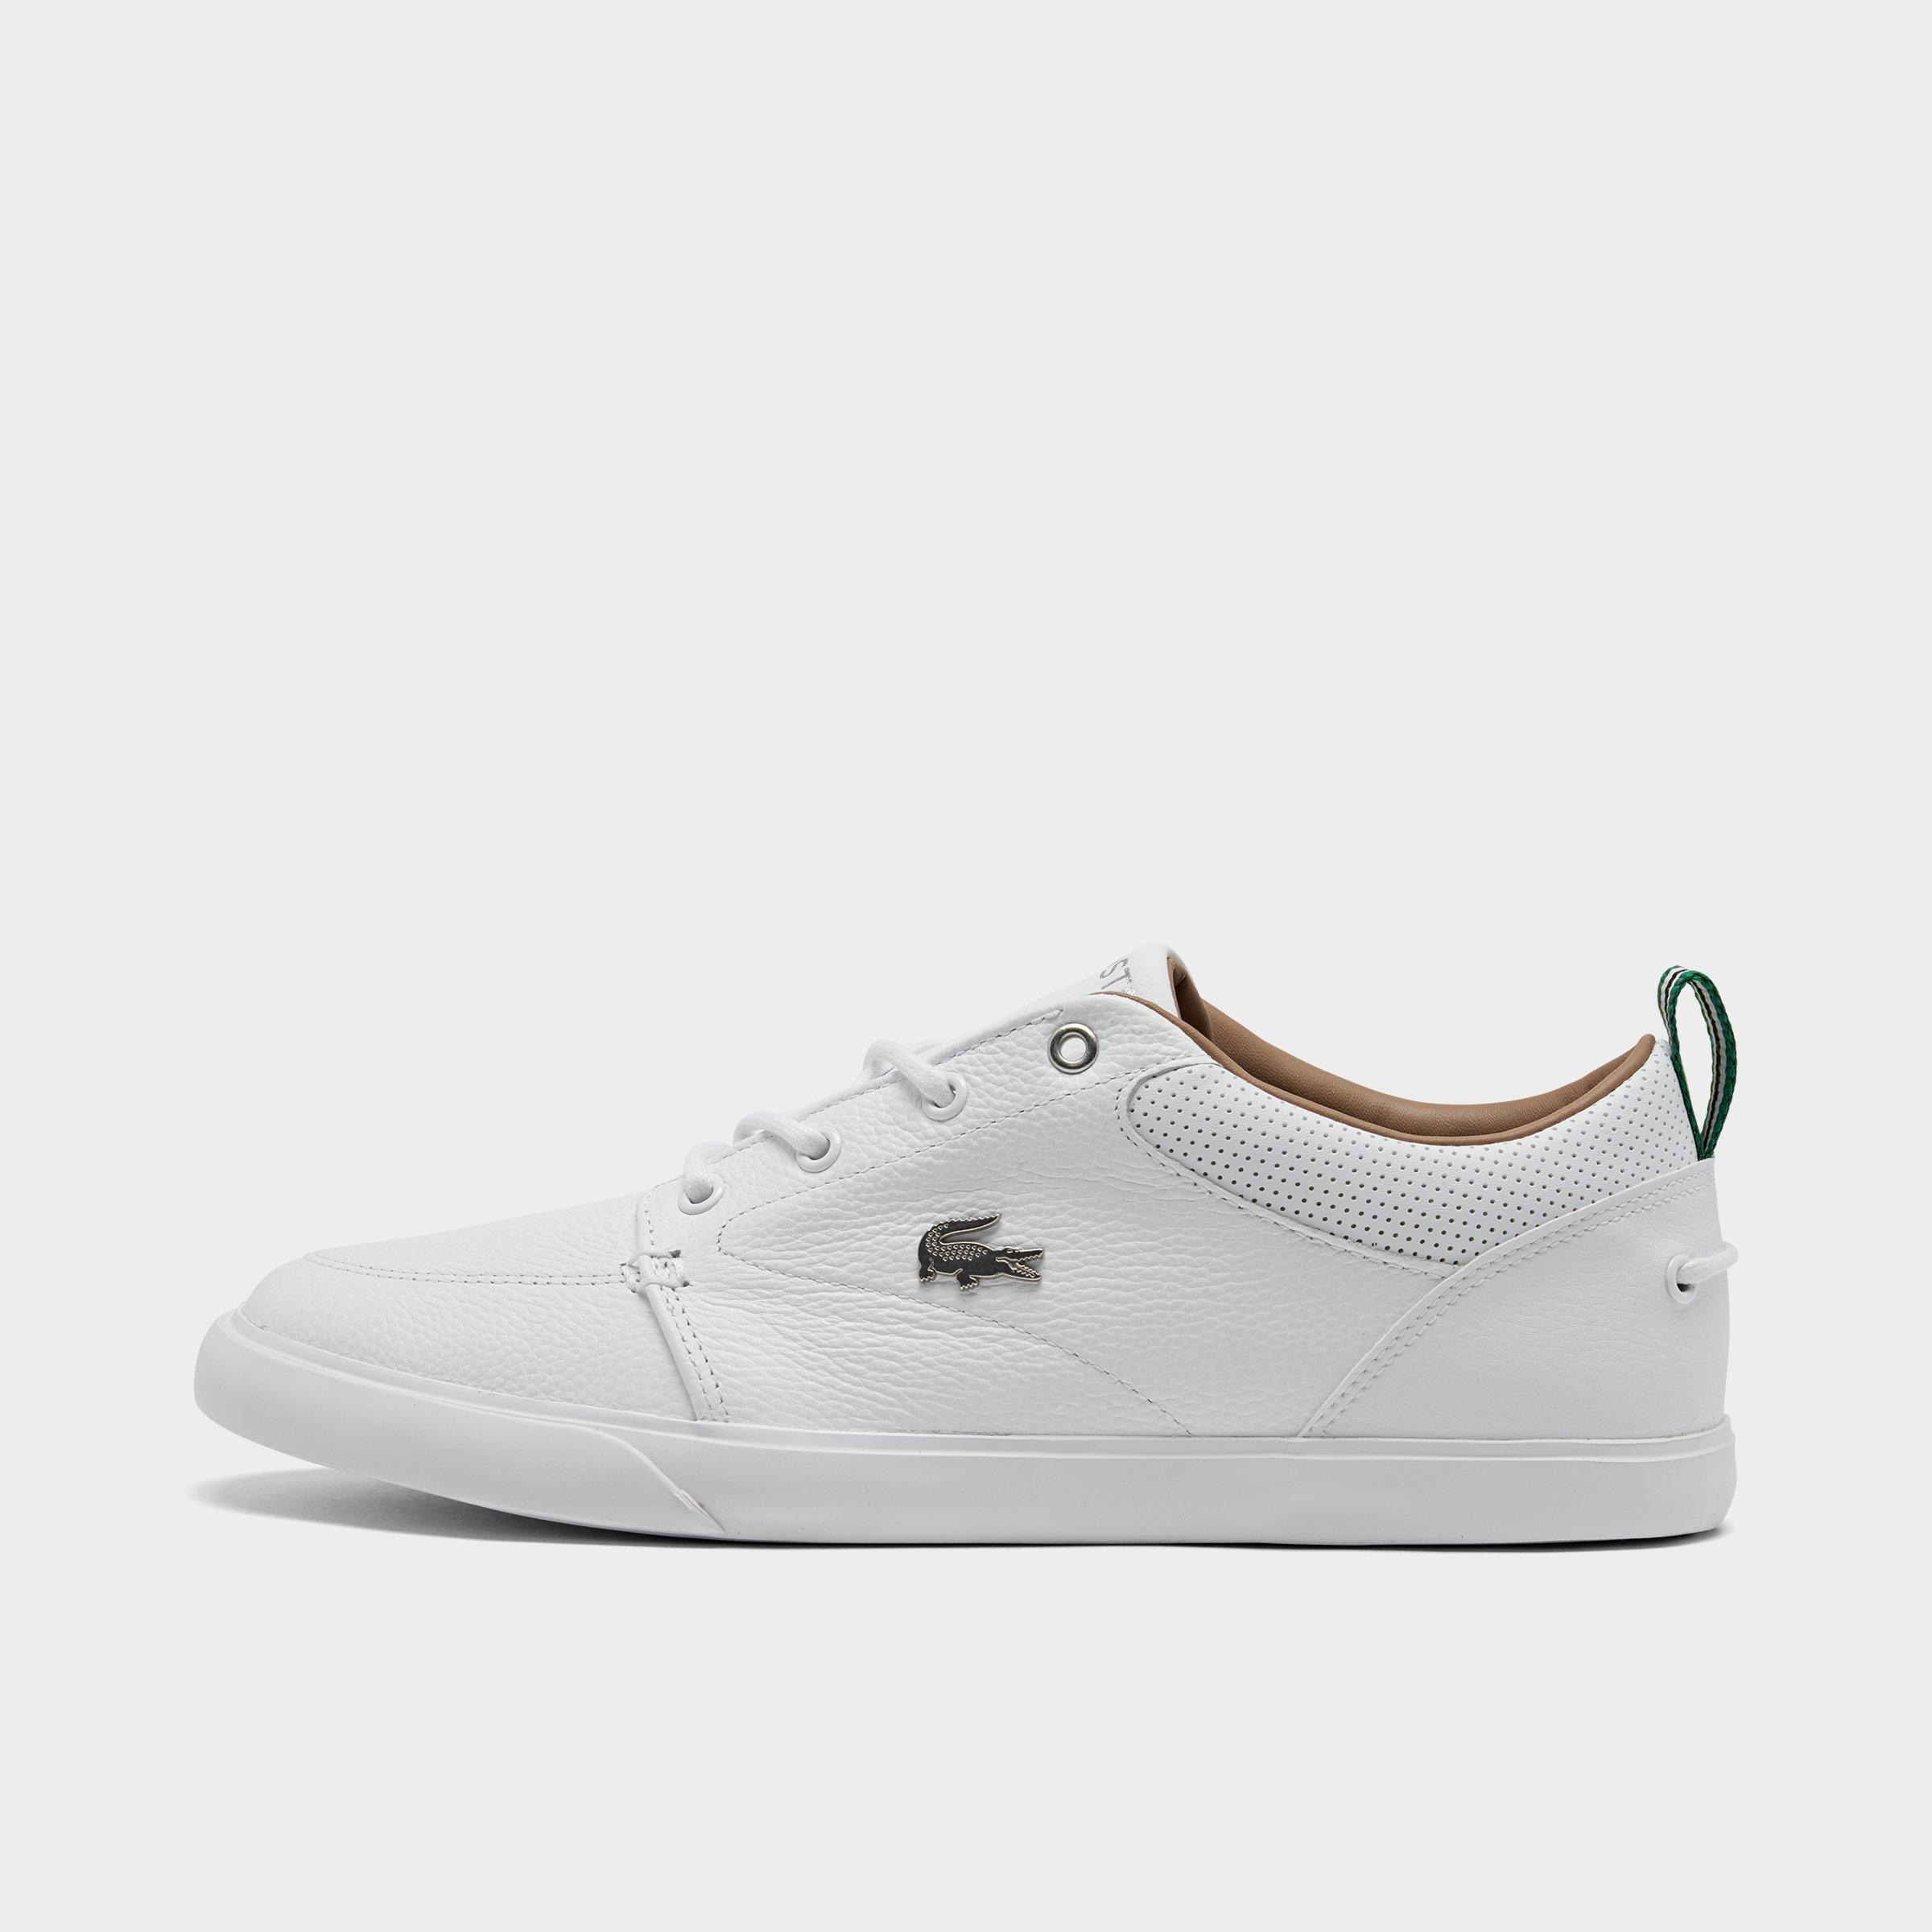 jd sports mens lacoste trainers